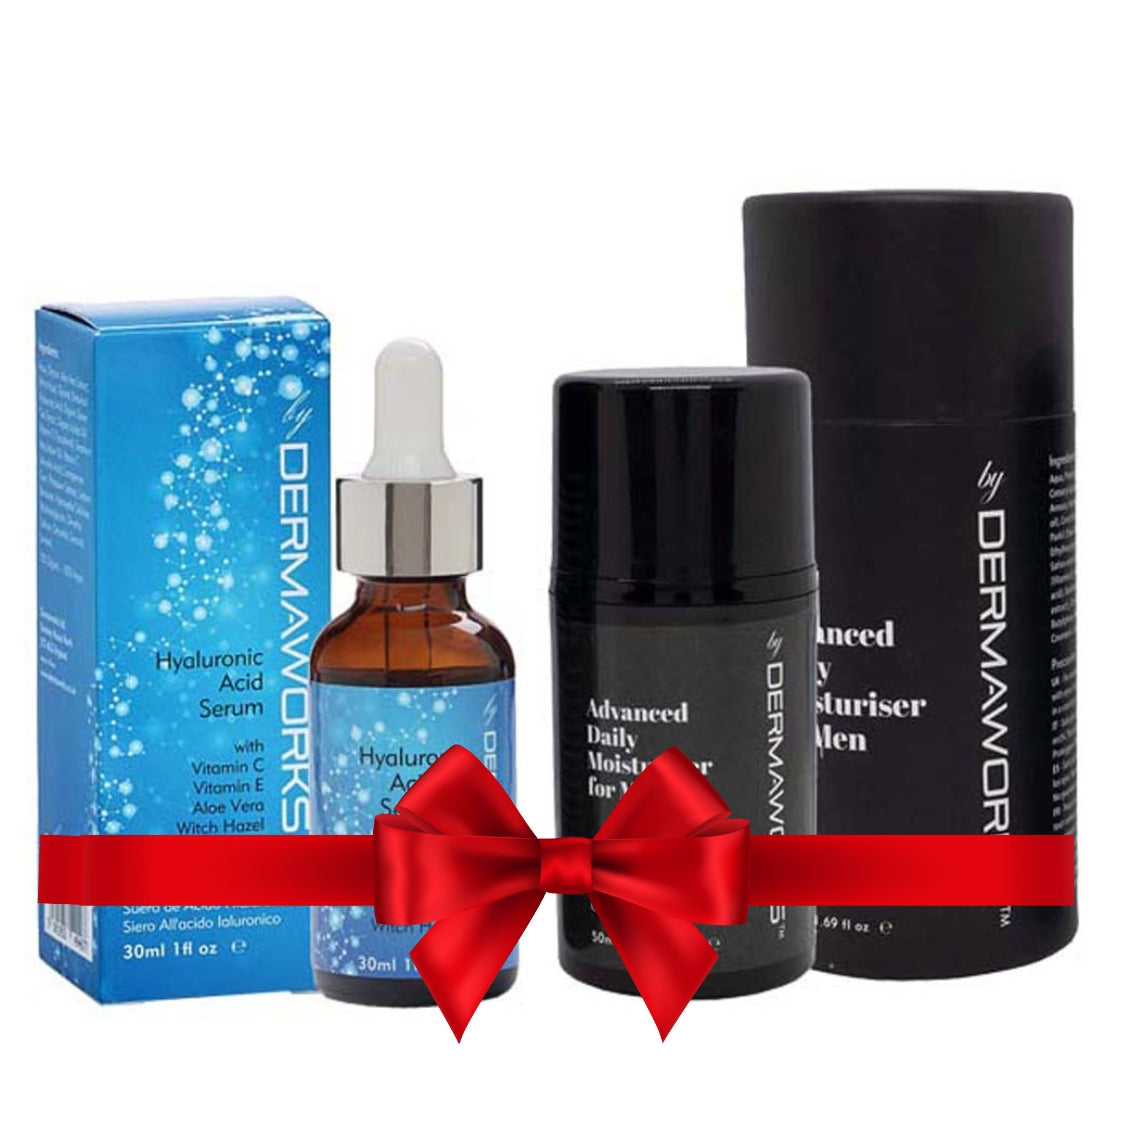 Dermaworks Skincare and Beauty Hyaluronic acid serum for face and neck and mens moisturiser, skin care bundle, with santa hat, great christmas gift old